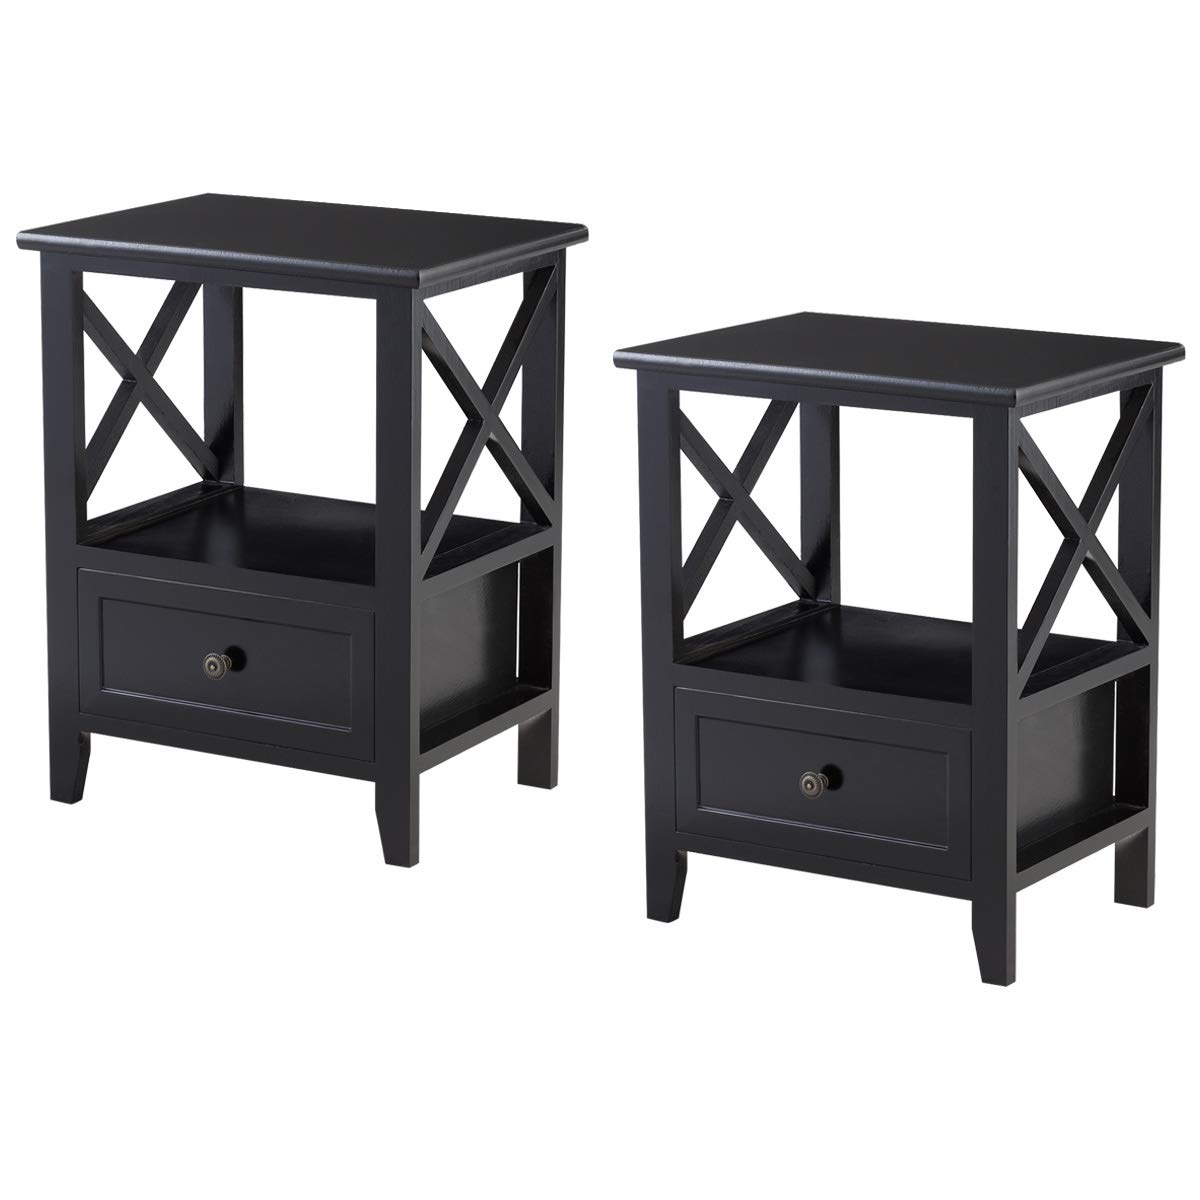 giantex nightstand set end tables storage shelf exxl bedroom black and wooden drawer for living room bedside accent home furniture side table round glass top coffee floor standing